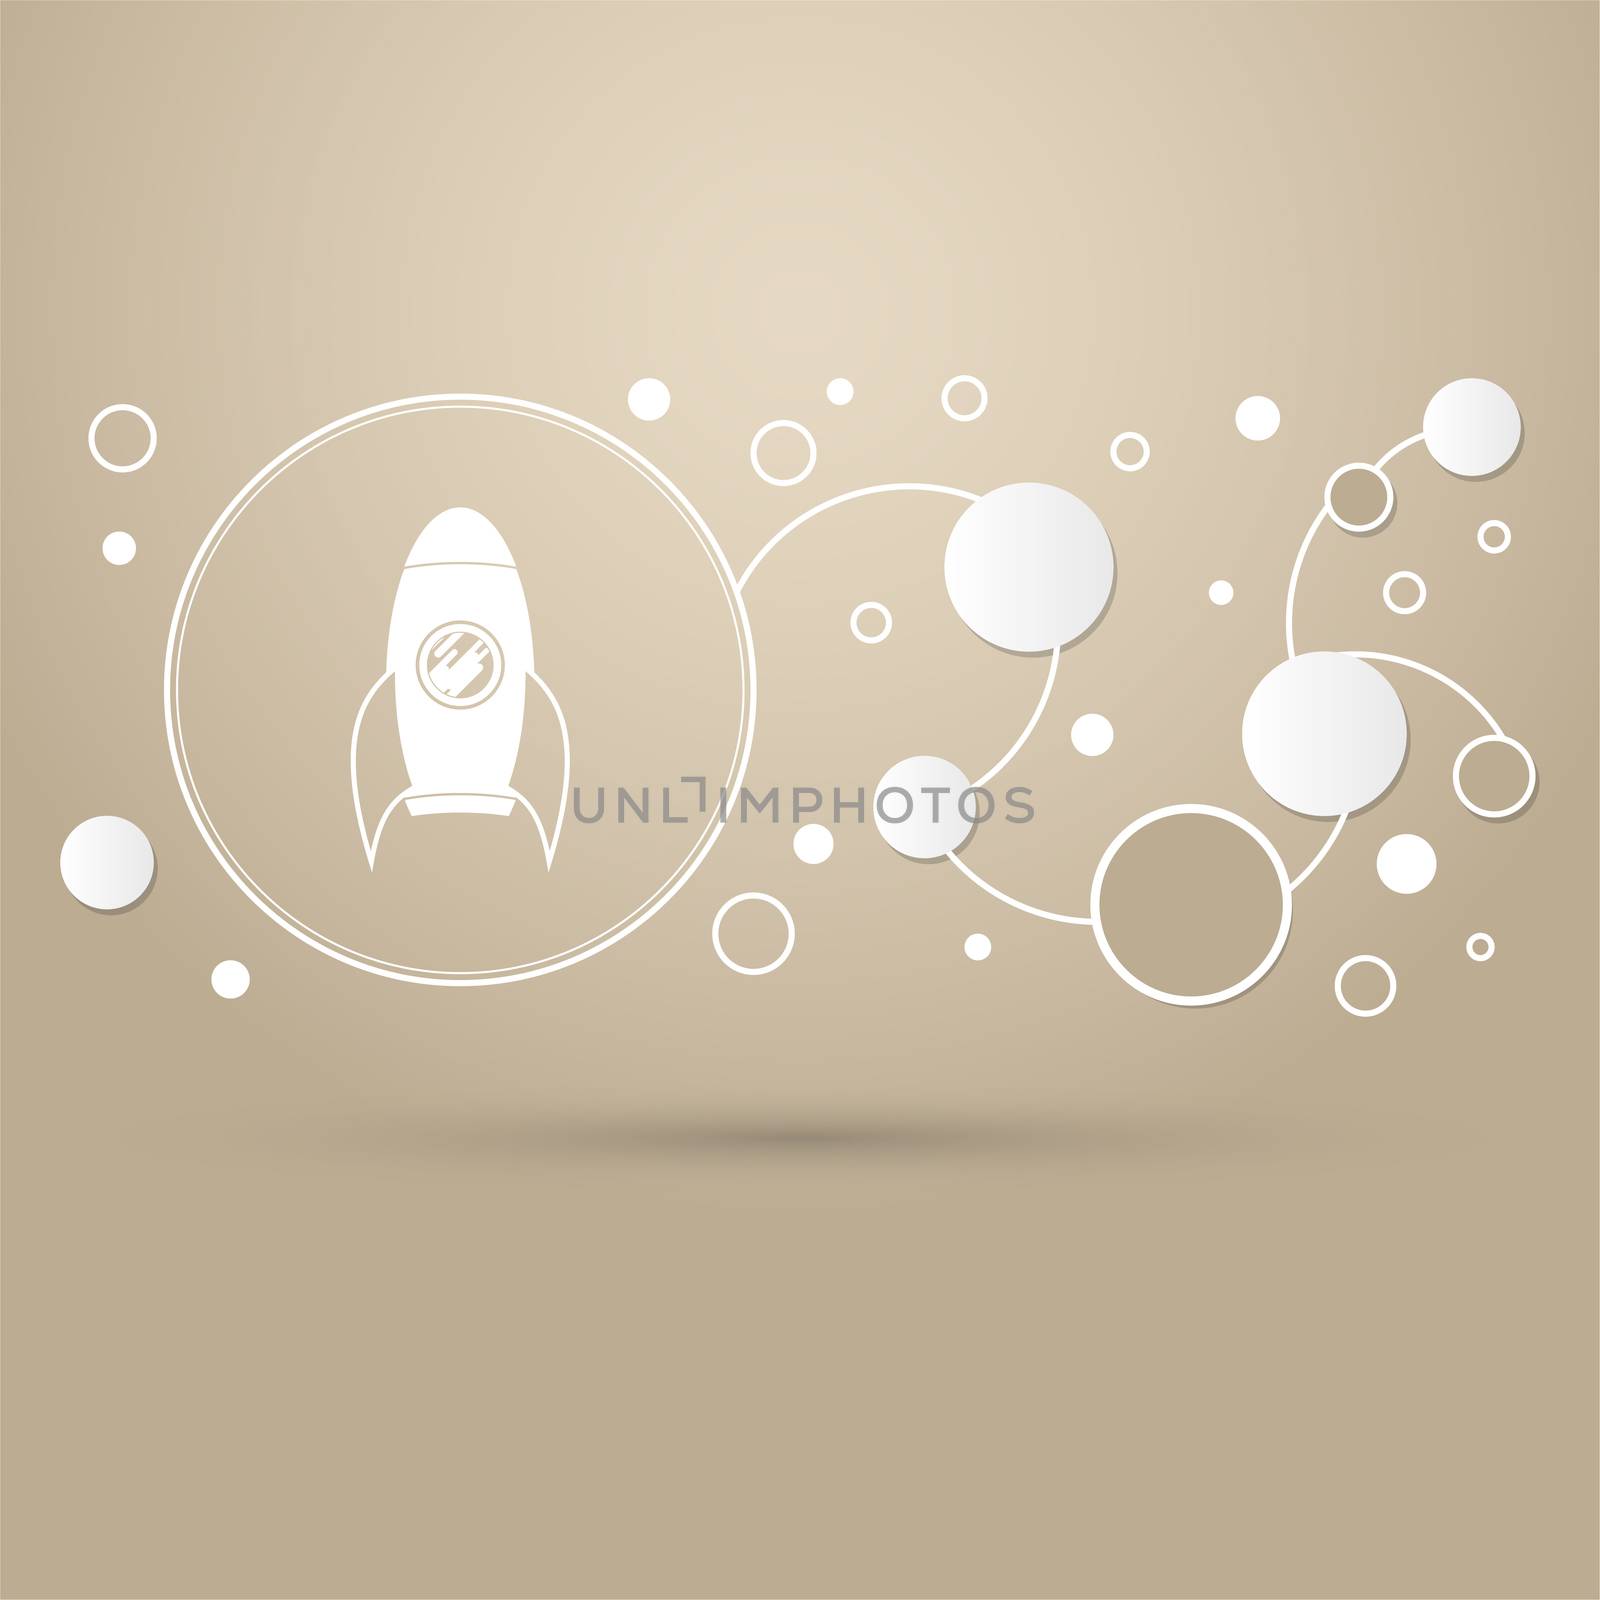 Rocket icon on a brown background with elegant style and modern design infographic. illustration